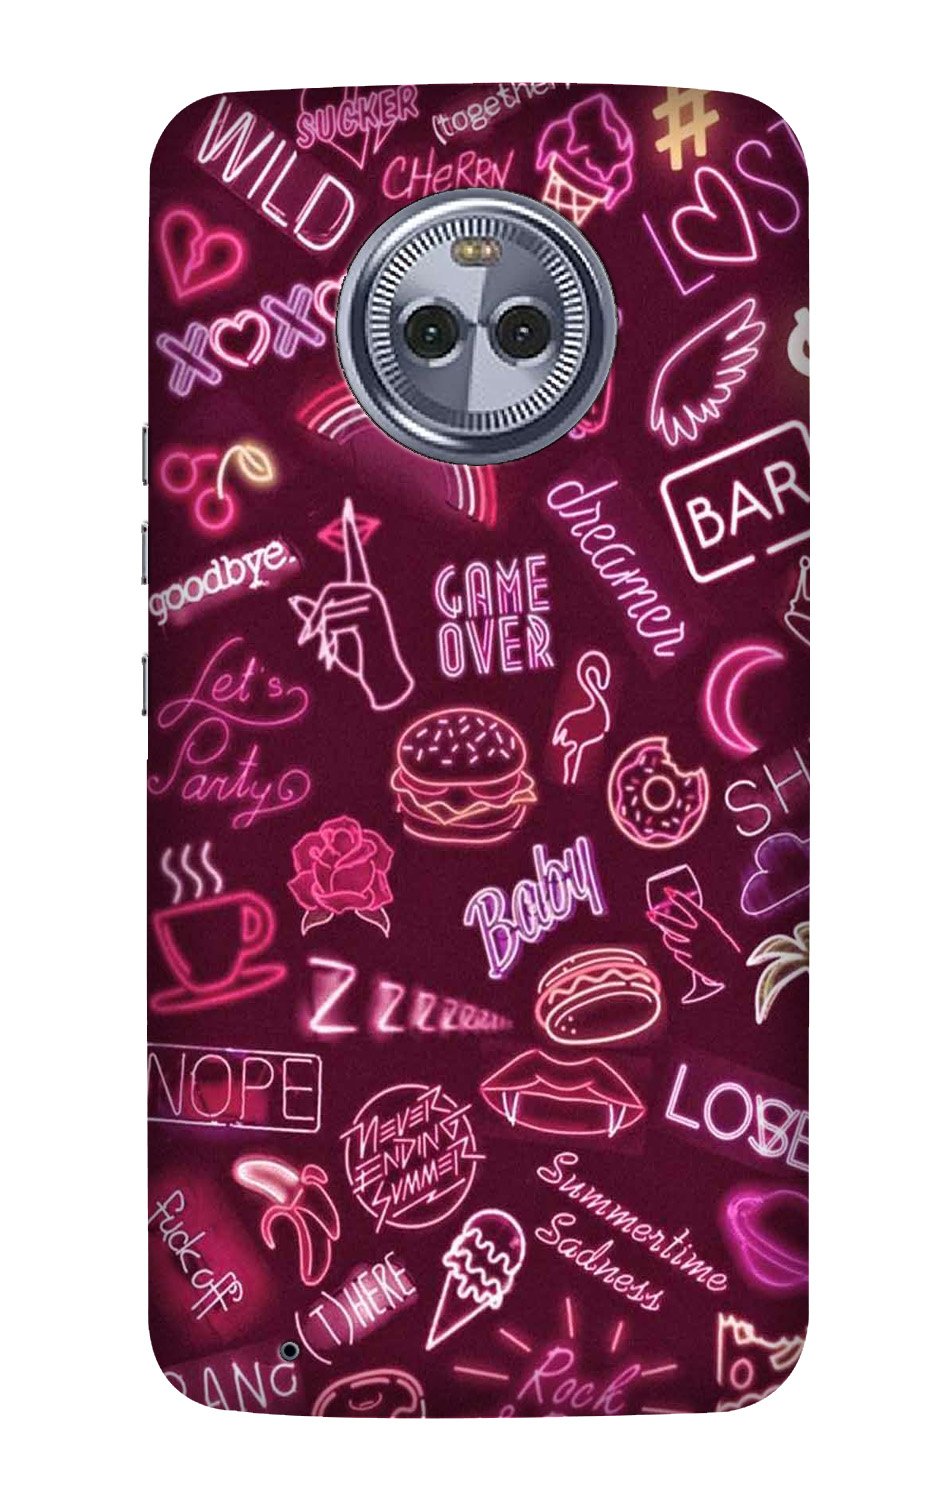 Party Theme Mobile Back Case for Moto G6 (Design - 392)